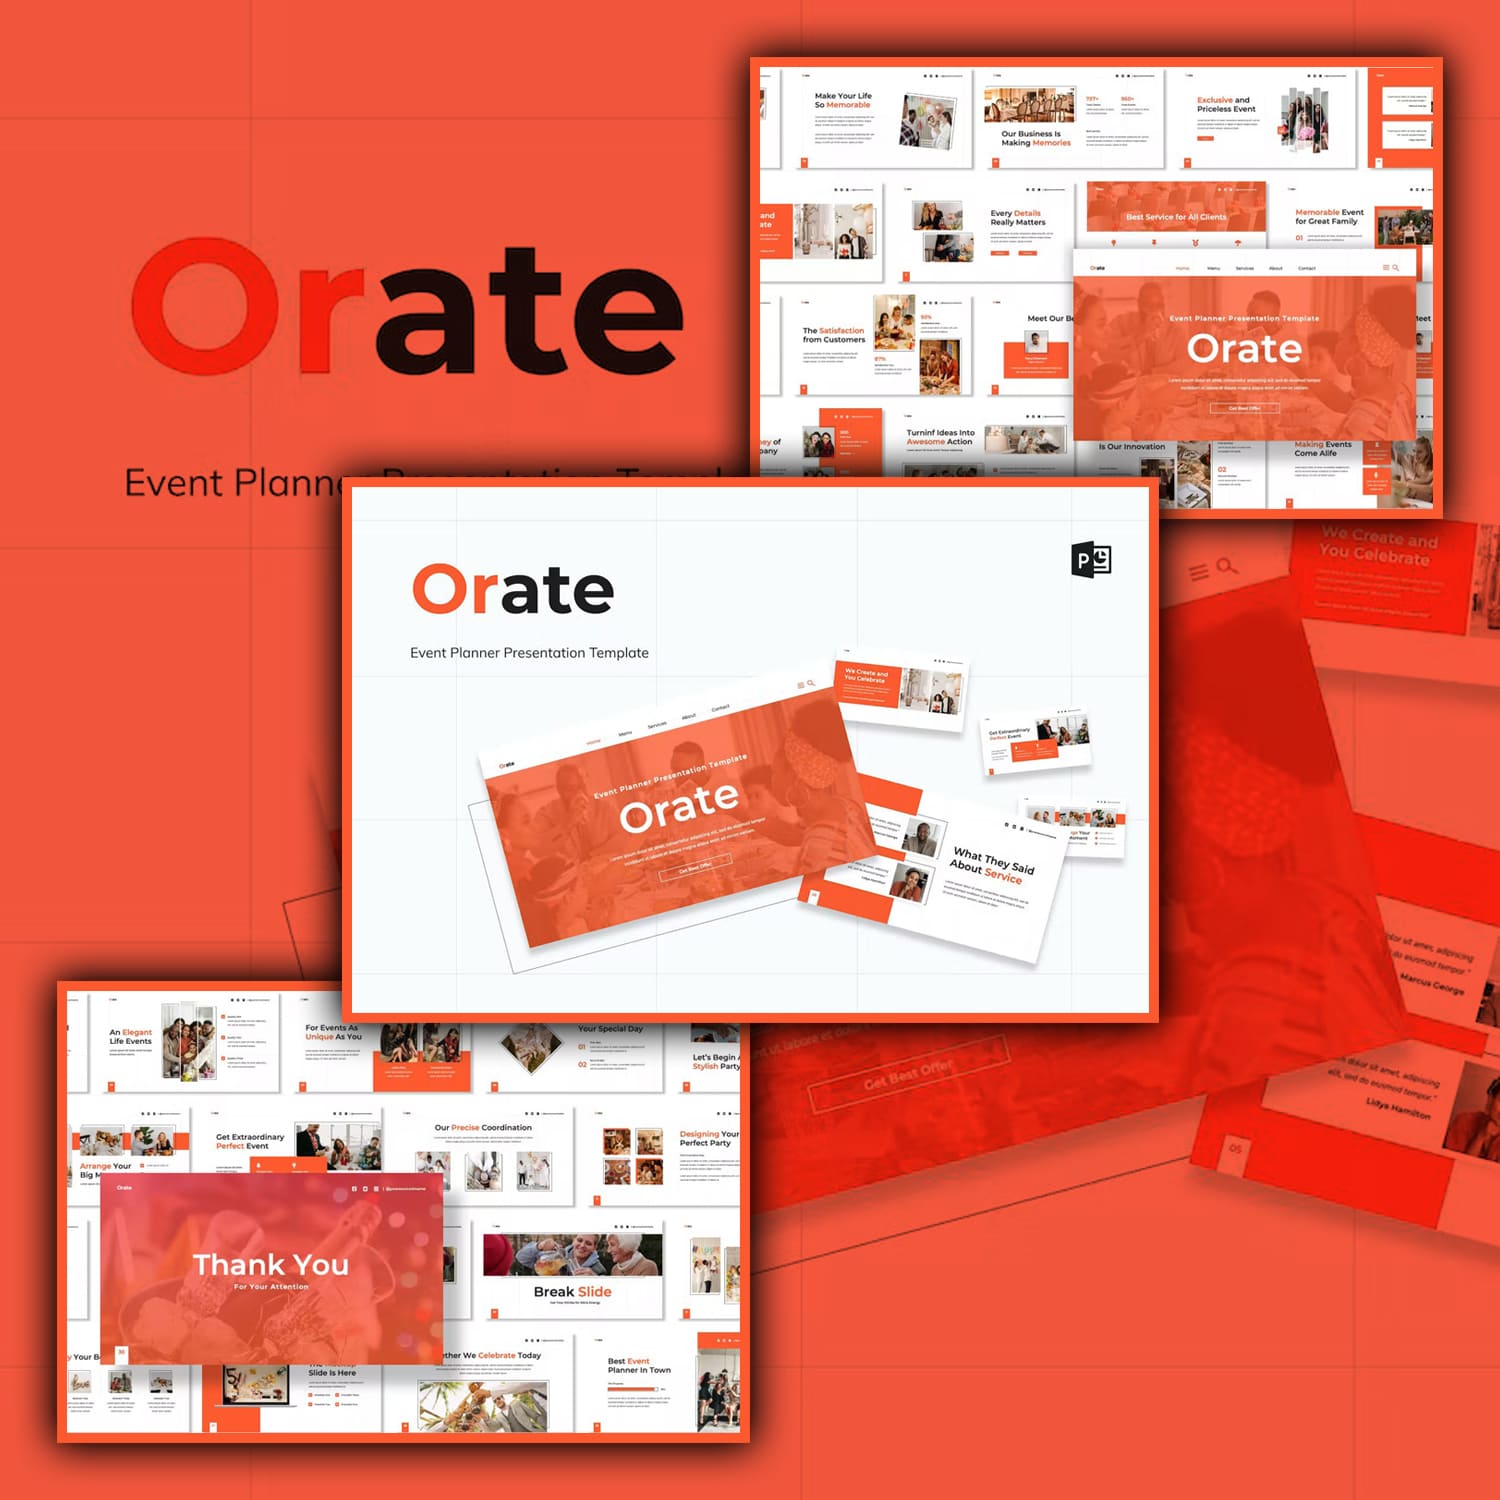 Orate - Event Planner Presentation Powerpoint Cover.